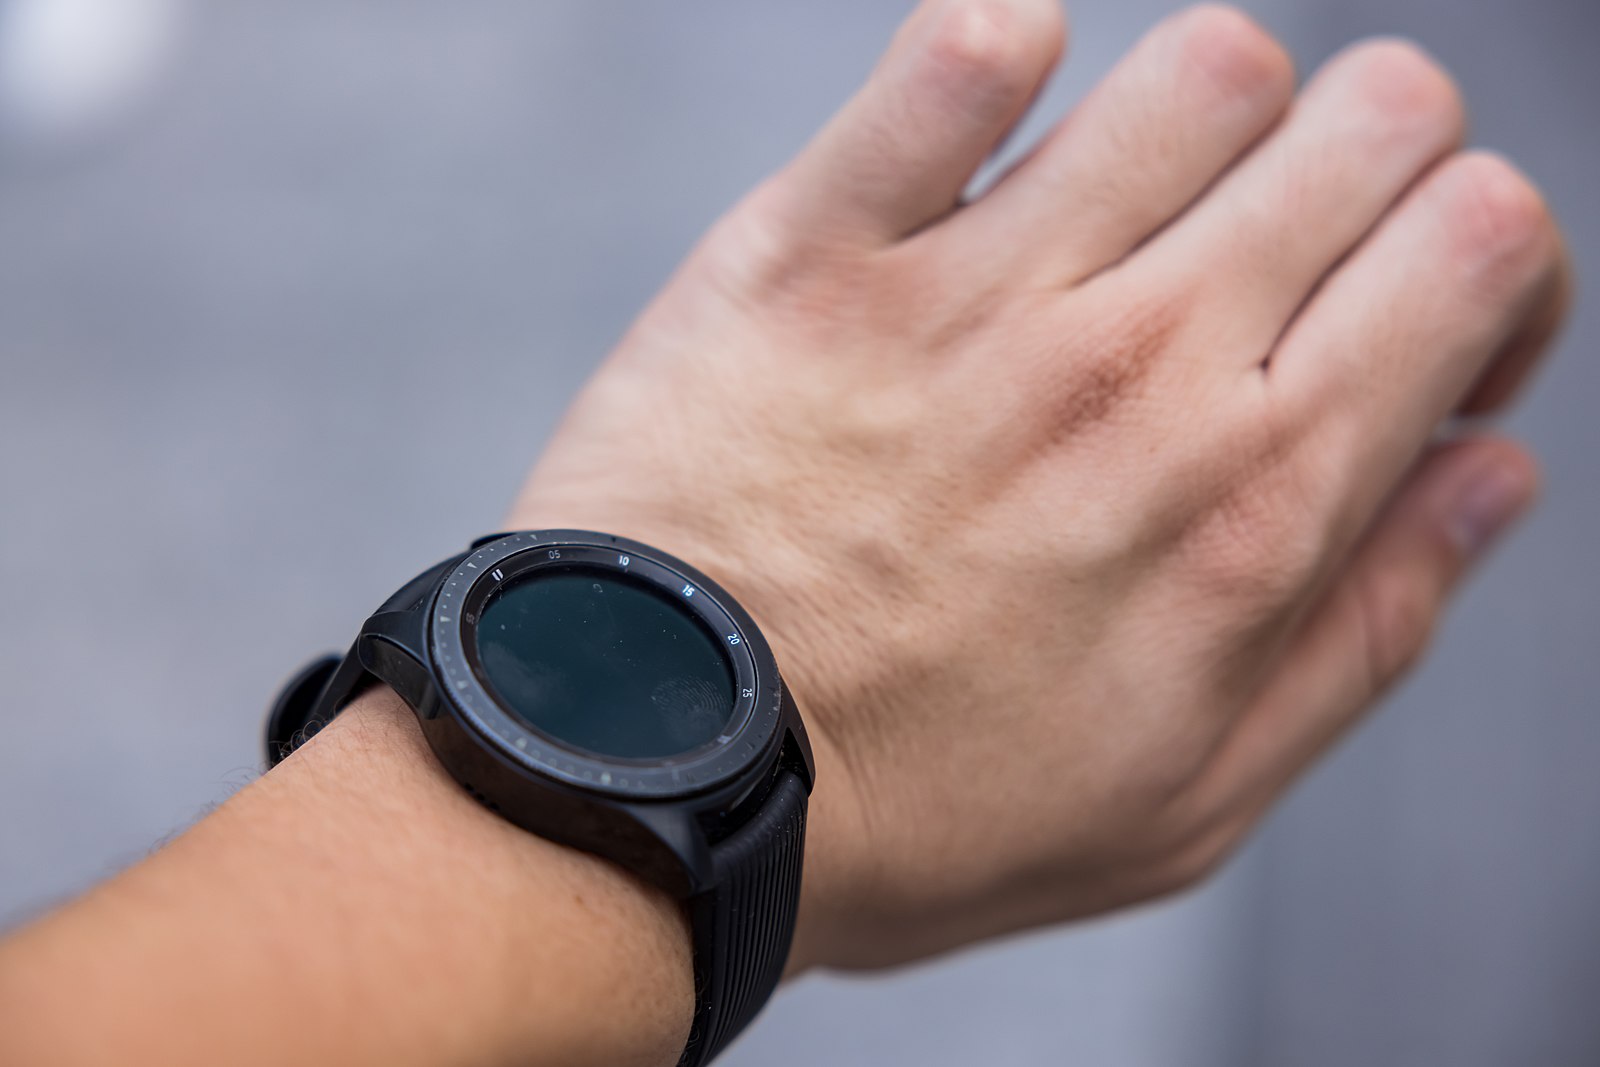 Smartwatches are motivating people to exercise. 